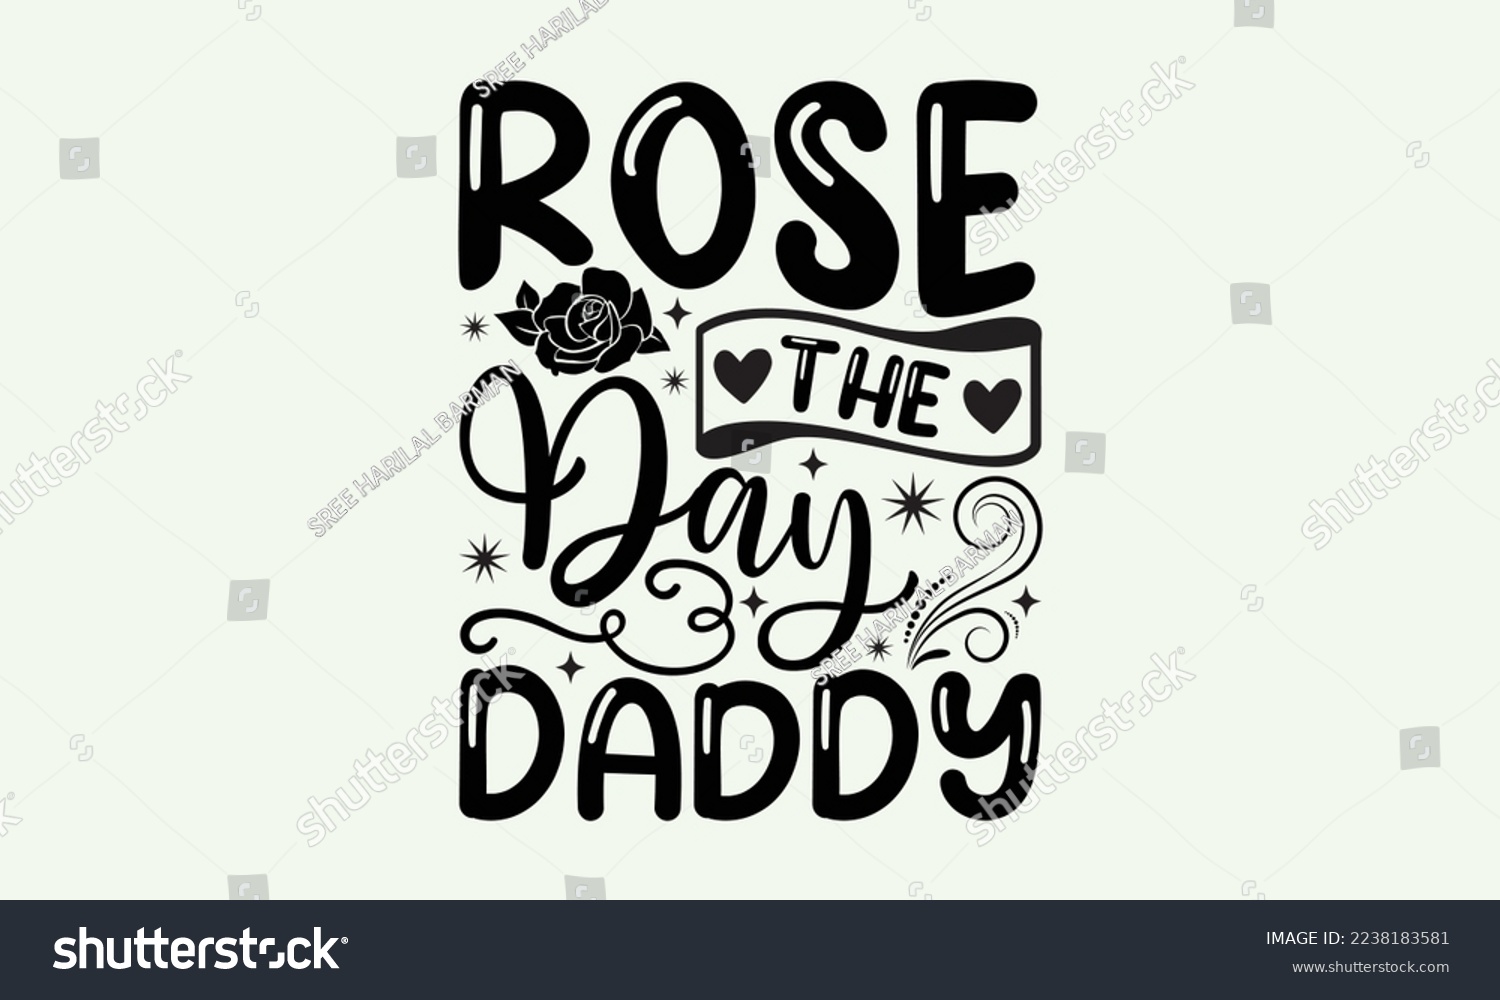 SVG of Rose the day daddy - President's day T-shirt Design, File Sports SVG Design, Sports typography t-shirt design, For stickers, Templet, mugs, etc. for Cutting, cards, and flyers. svg